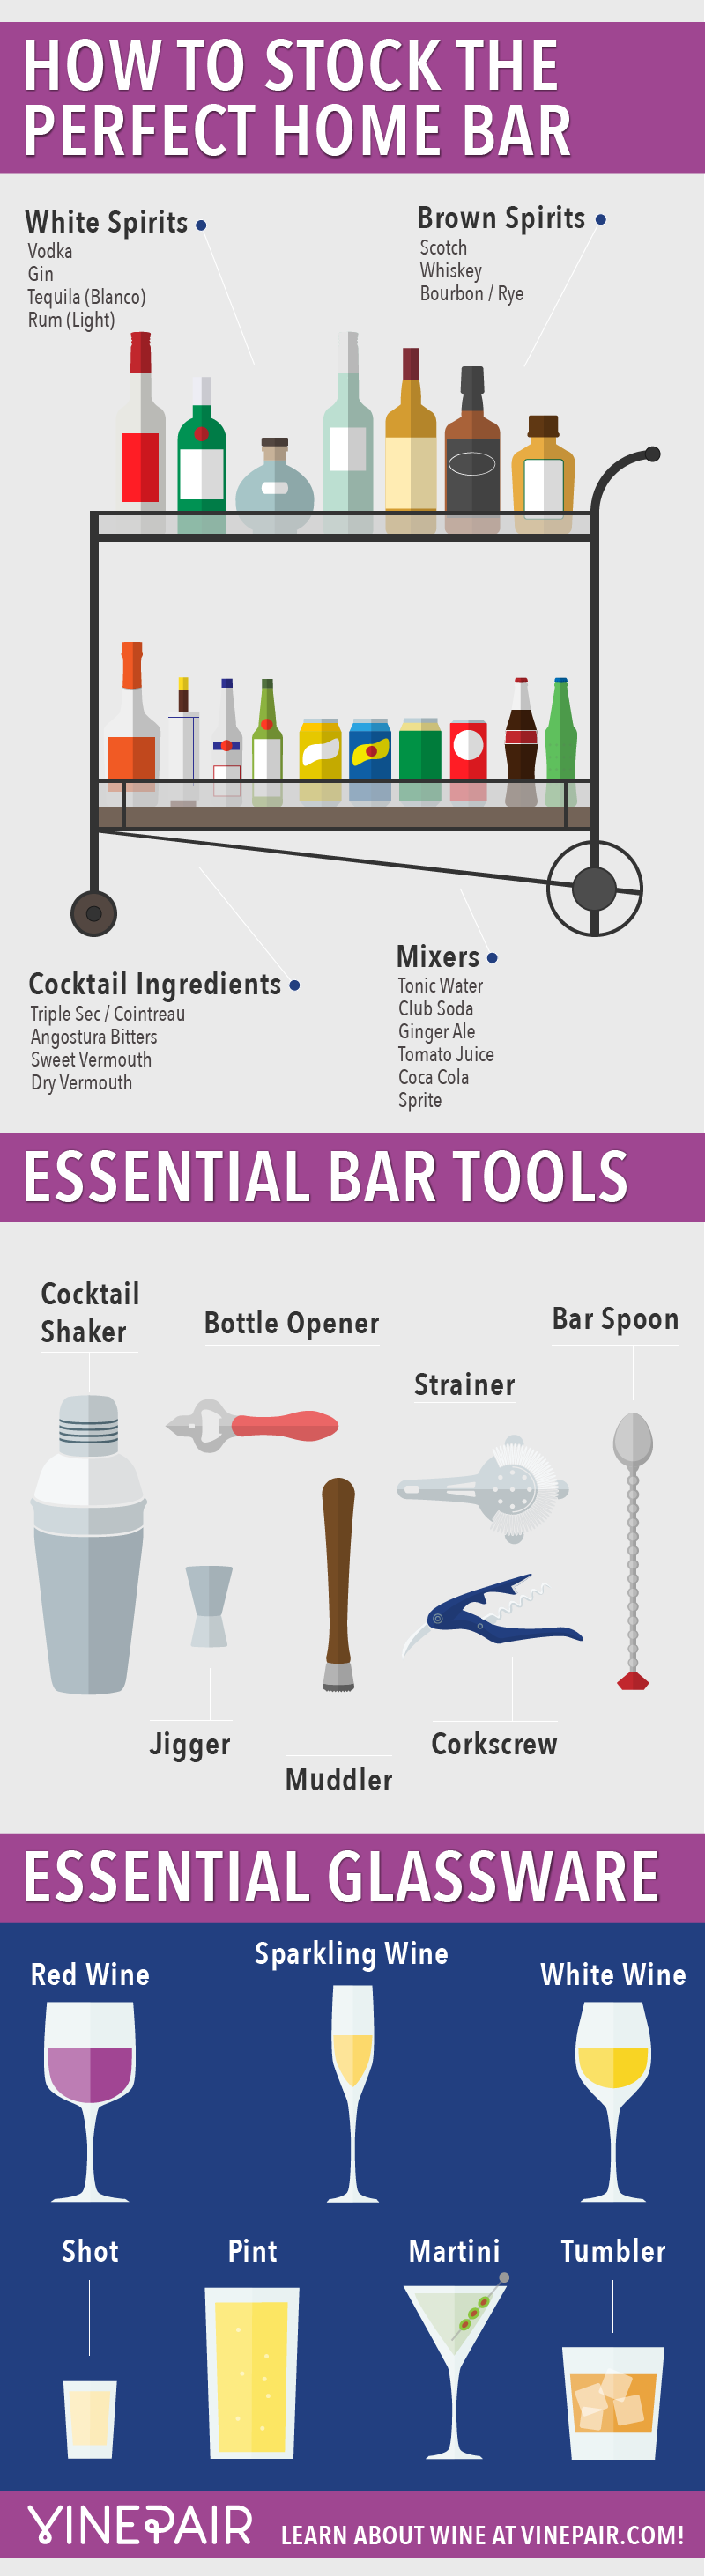 How To Stock The Perfect Home Bar Infographic